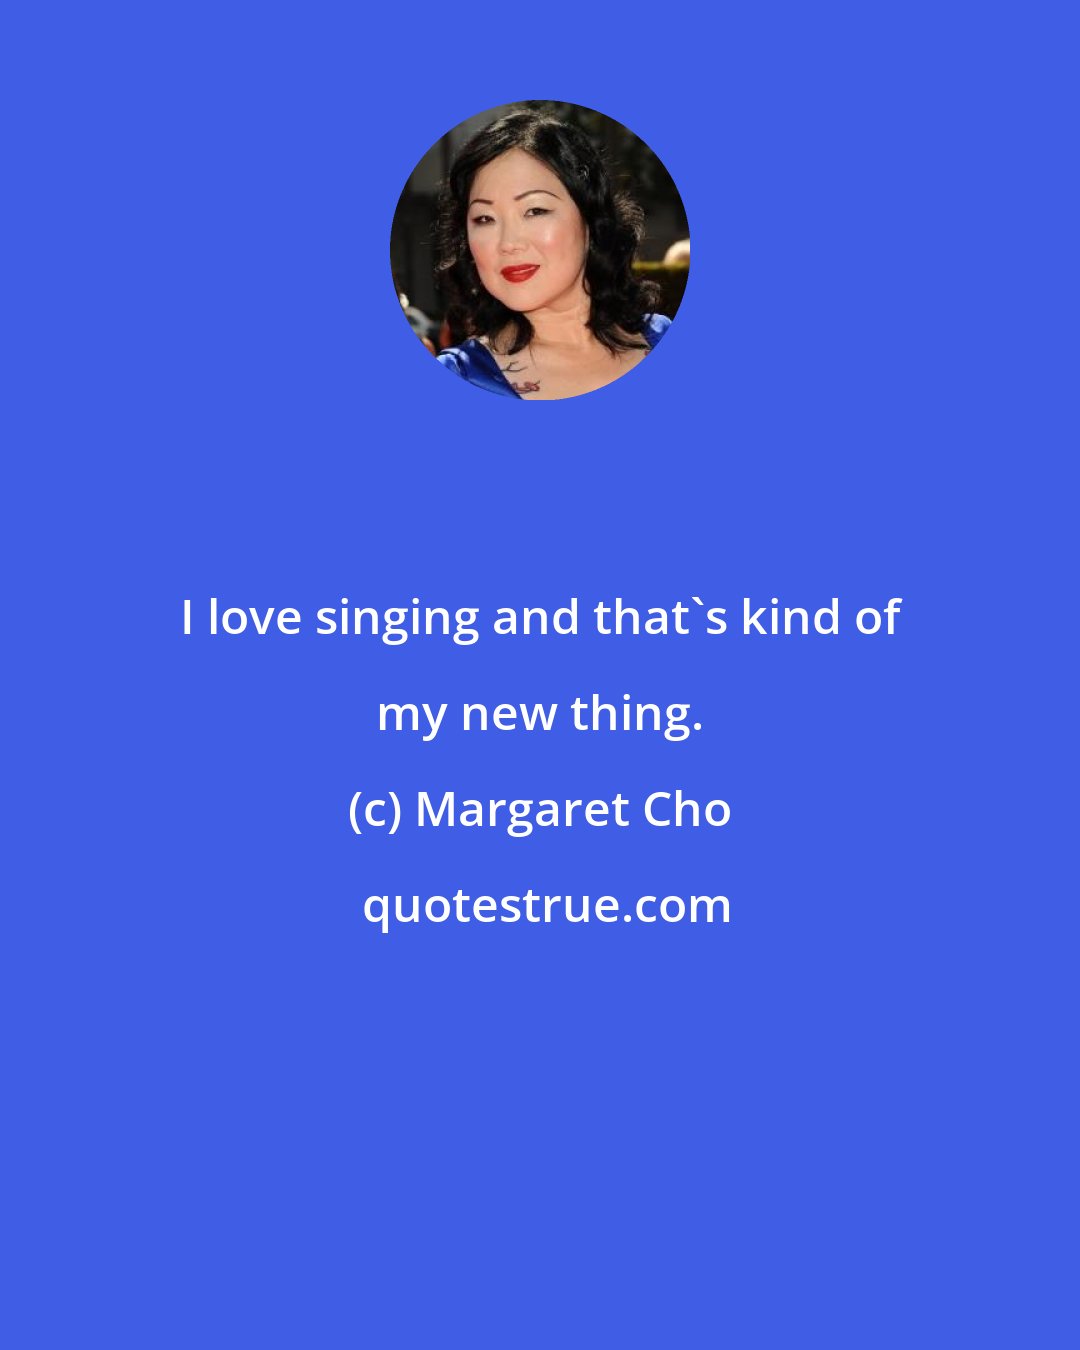 Margaret Cho: I love singing and that's kind of my new thing.